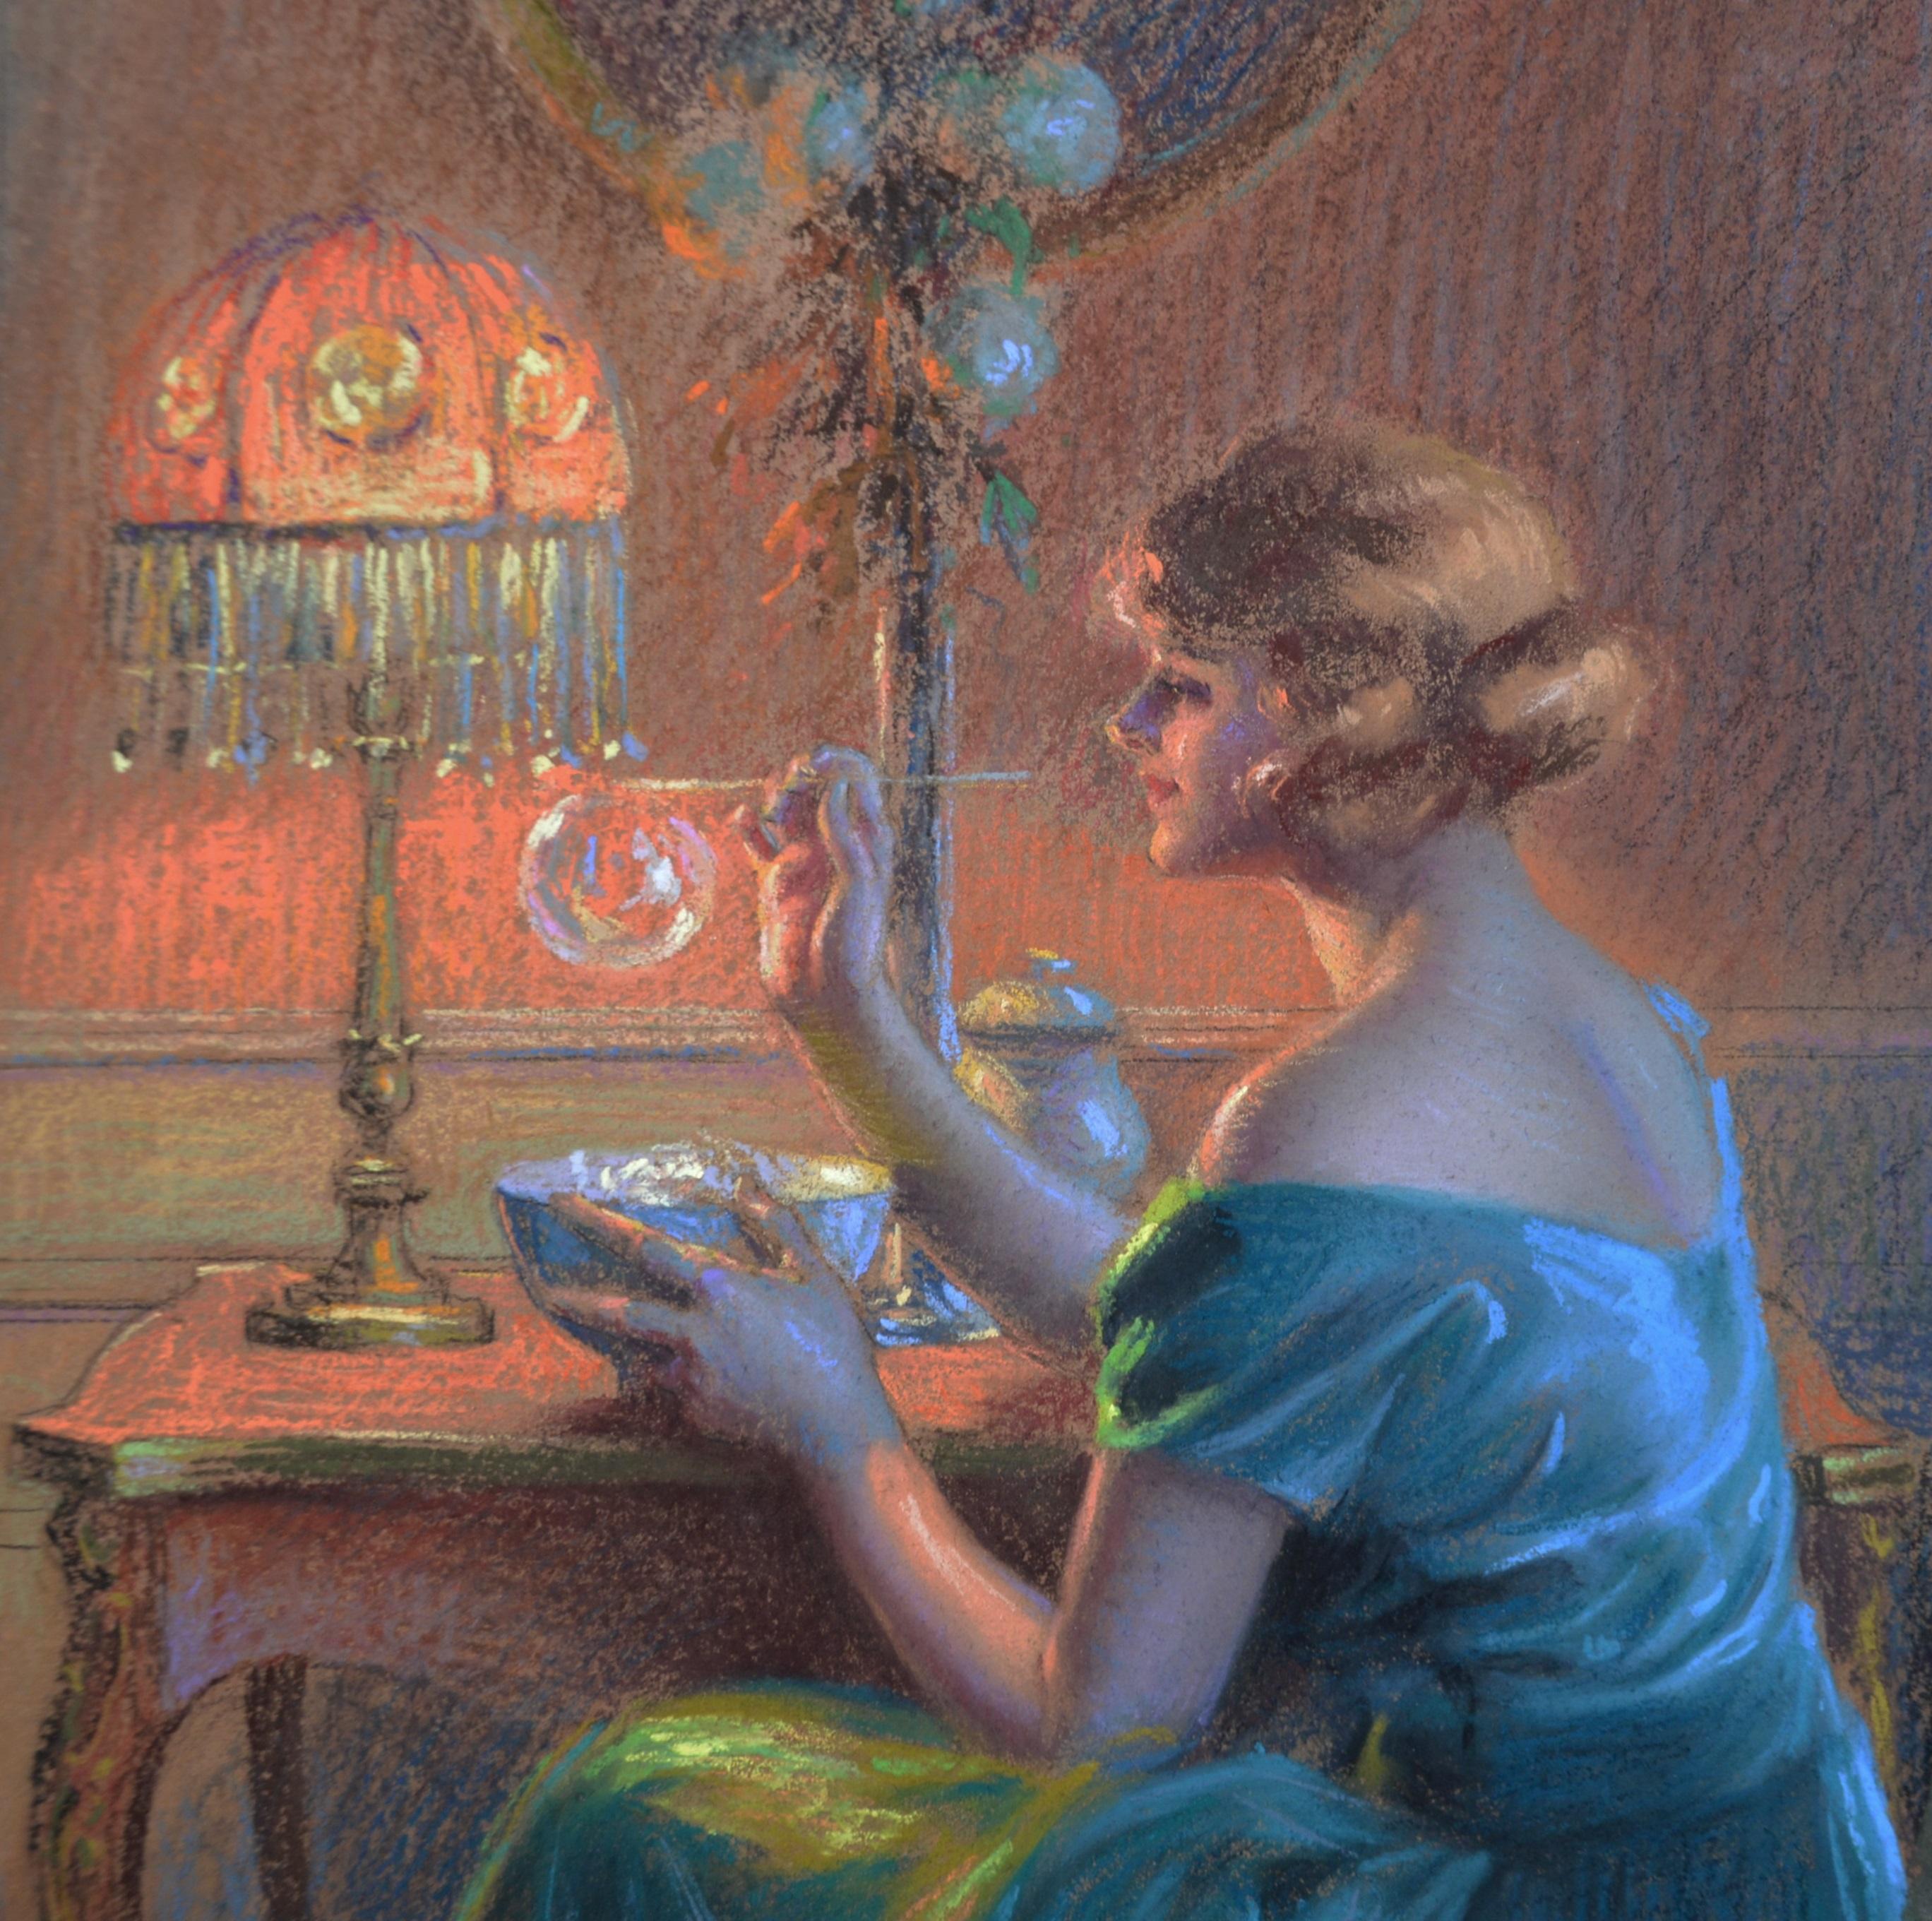 ‘Soap Bubbles’ by Delphin Enjolras (1857-1945) depicts a young Belle Epoque beauty lit by lamplight and is signed by the artist. It is displayed behind newly installed non-reflective UV resistant Museum Glass© and in a fine quality gold metal leaf